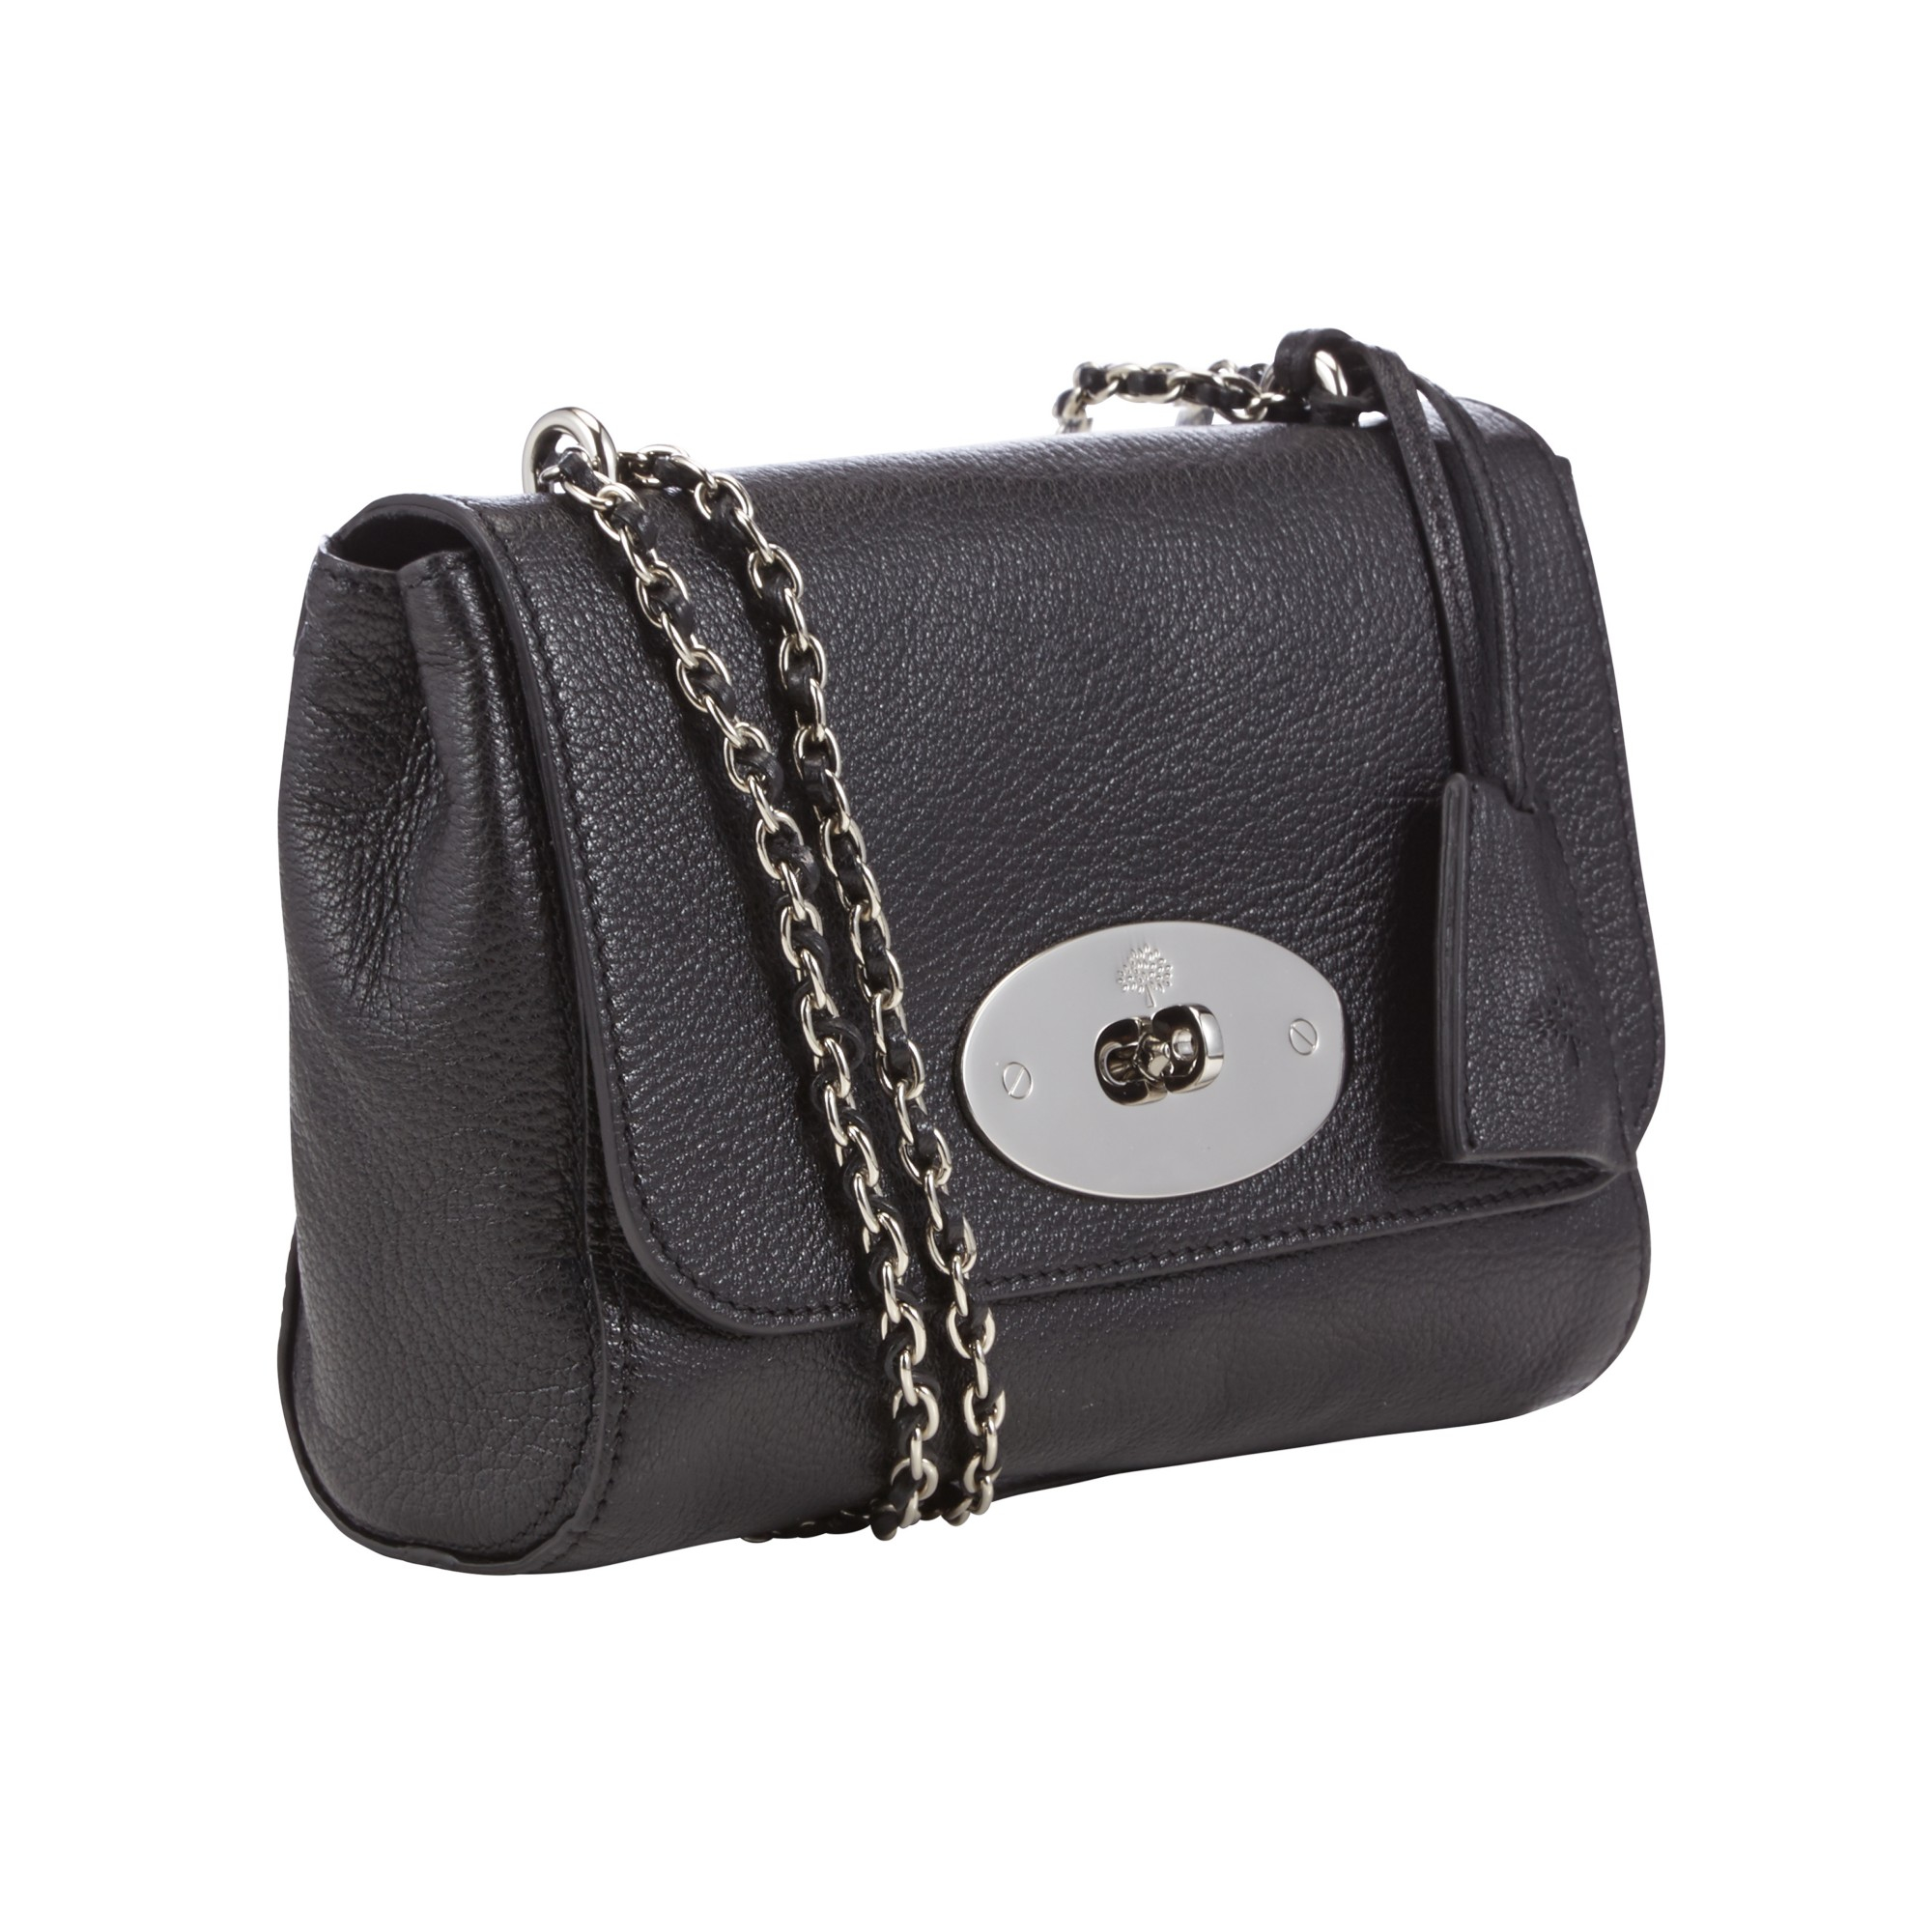 Mulberry Lily Leather Small Shoulder Handbag in Black (Metallic) | Lyst